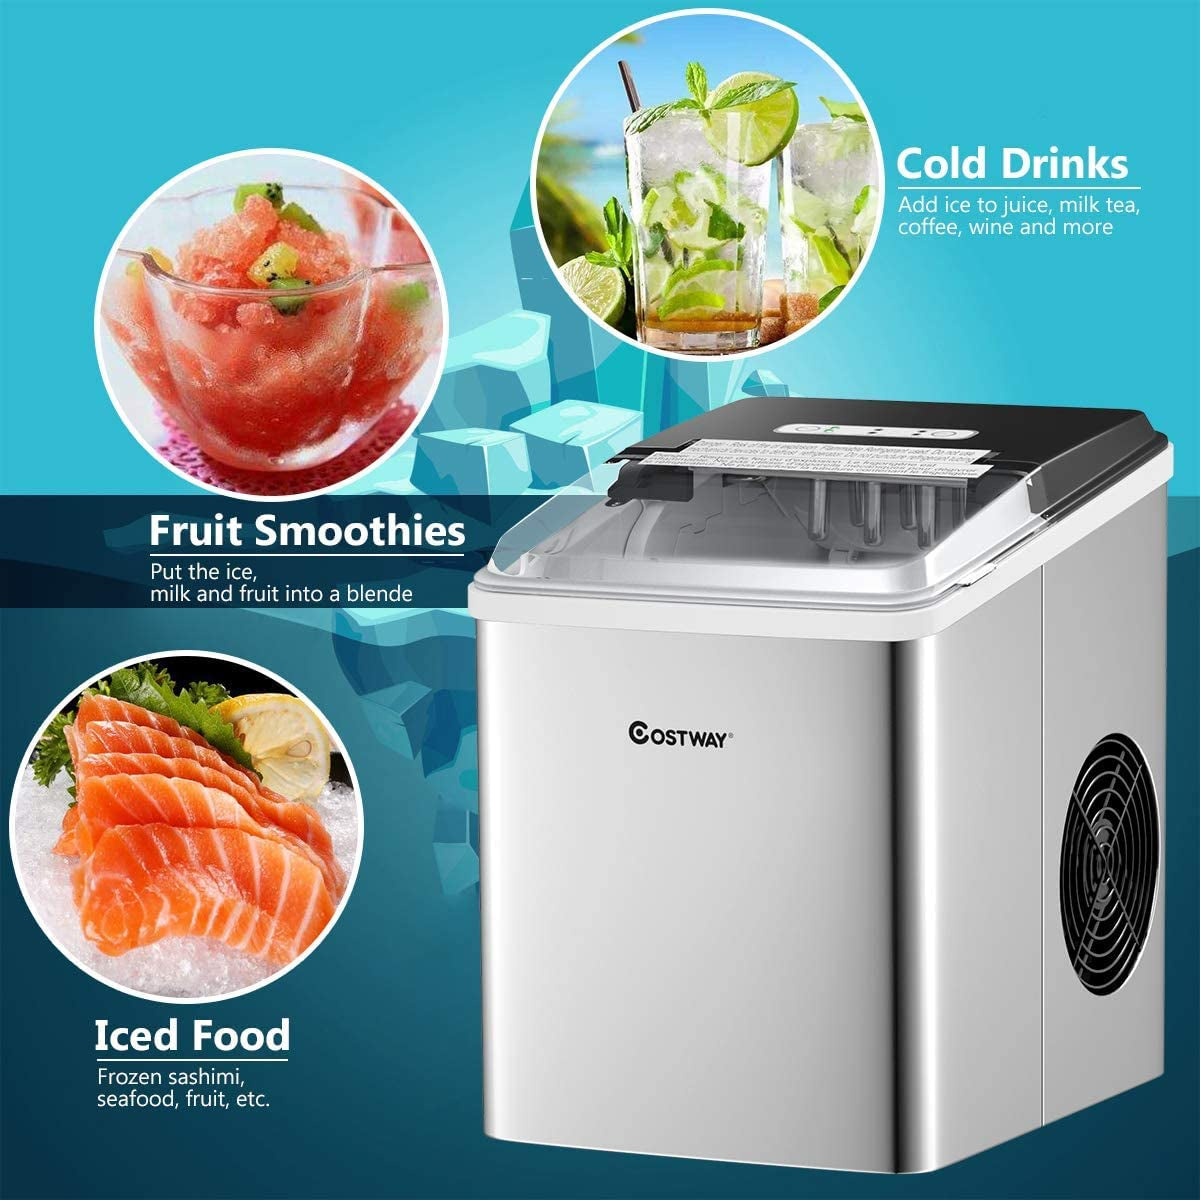 Countertop Ice Maker, Self-Cleaning Function, Ice Cubes Ready in 7 Minutes, 26LBS/24H Portable Stainless Steel Tabletop Ice Machine with Ice Scoop and Basket, Perfect for Home, Bar, Silver